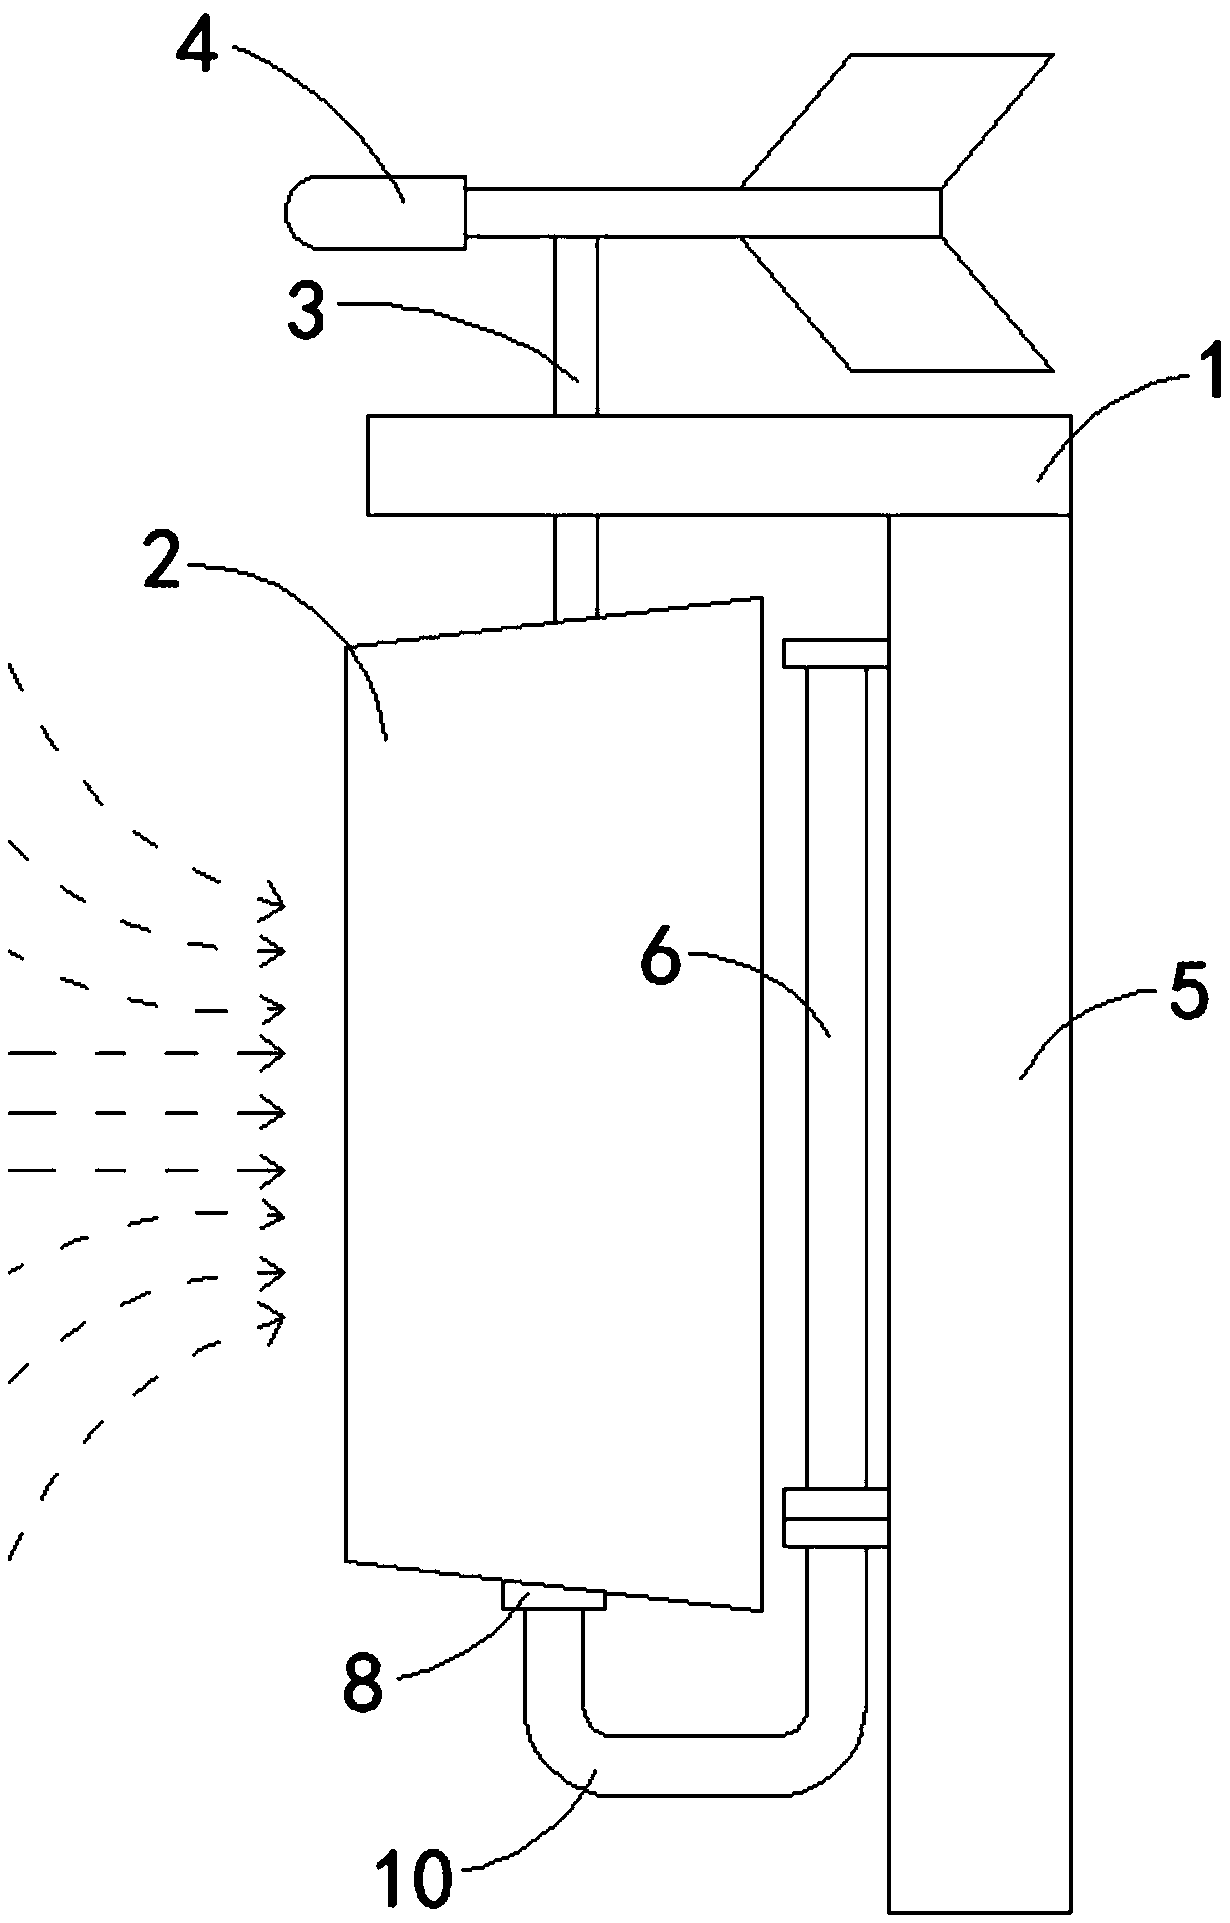 Anti-wind device for curtain